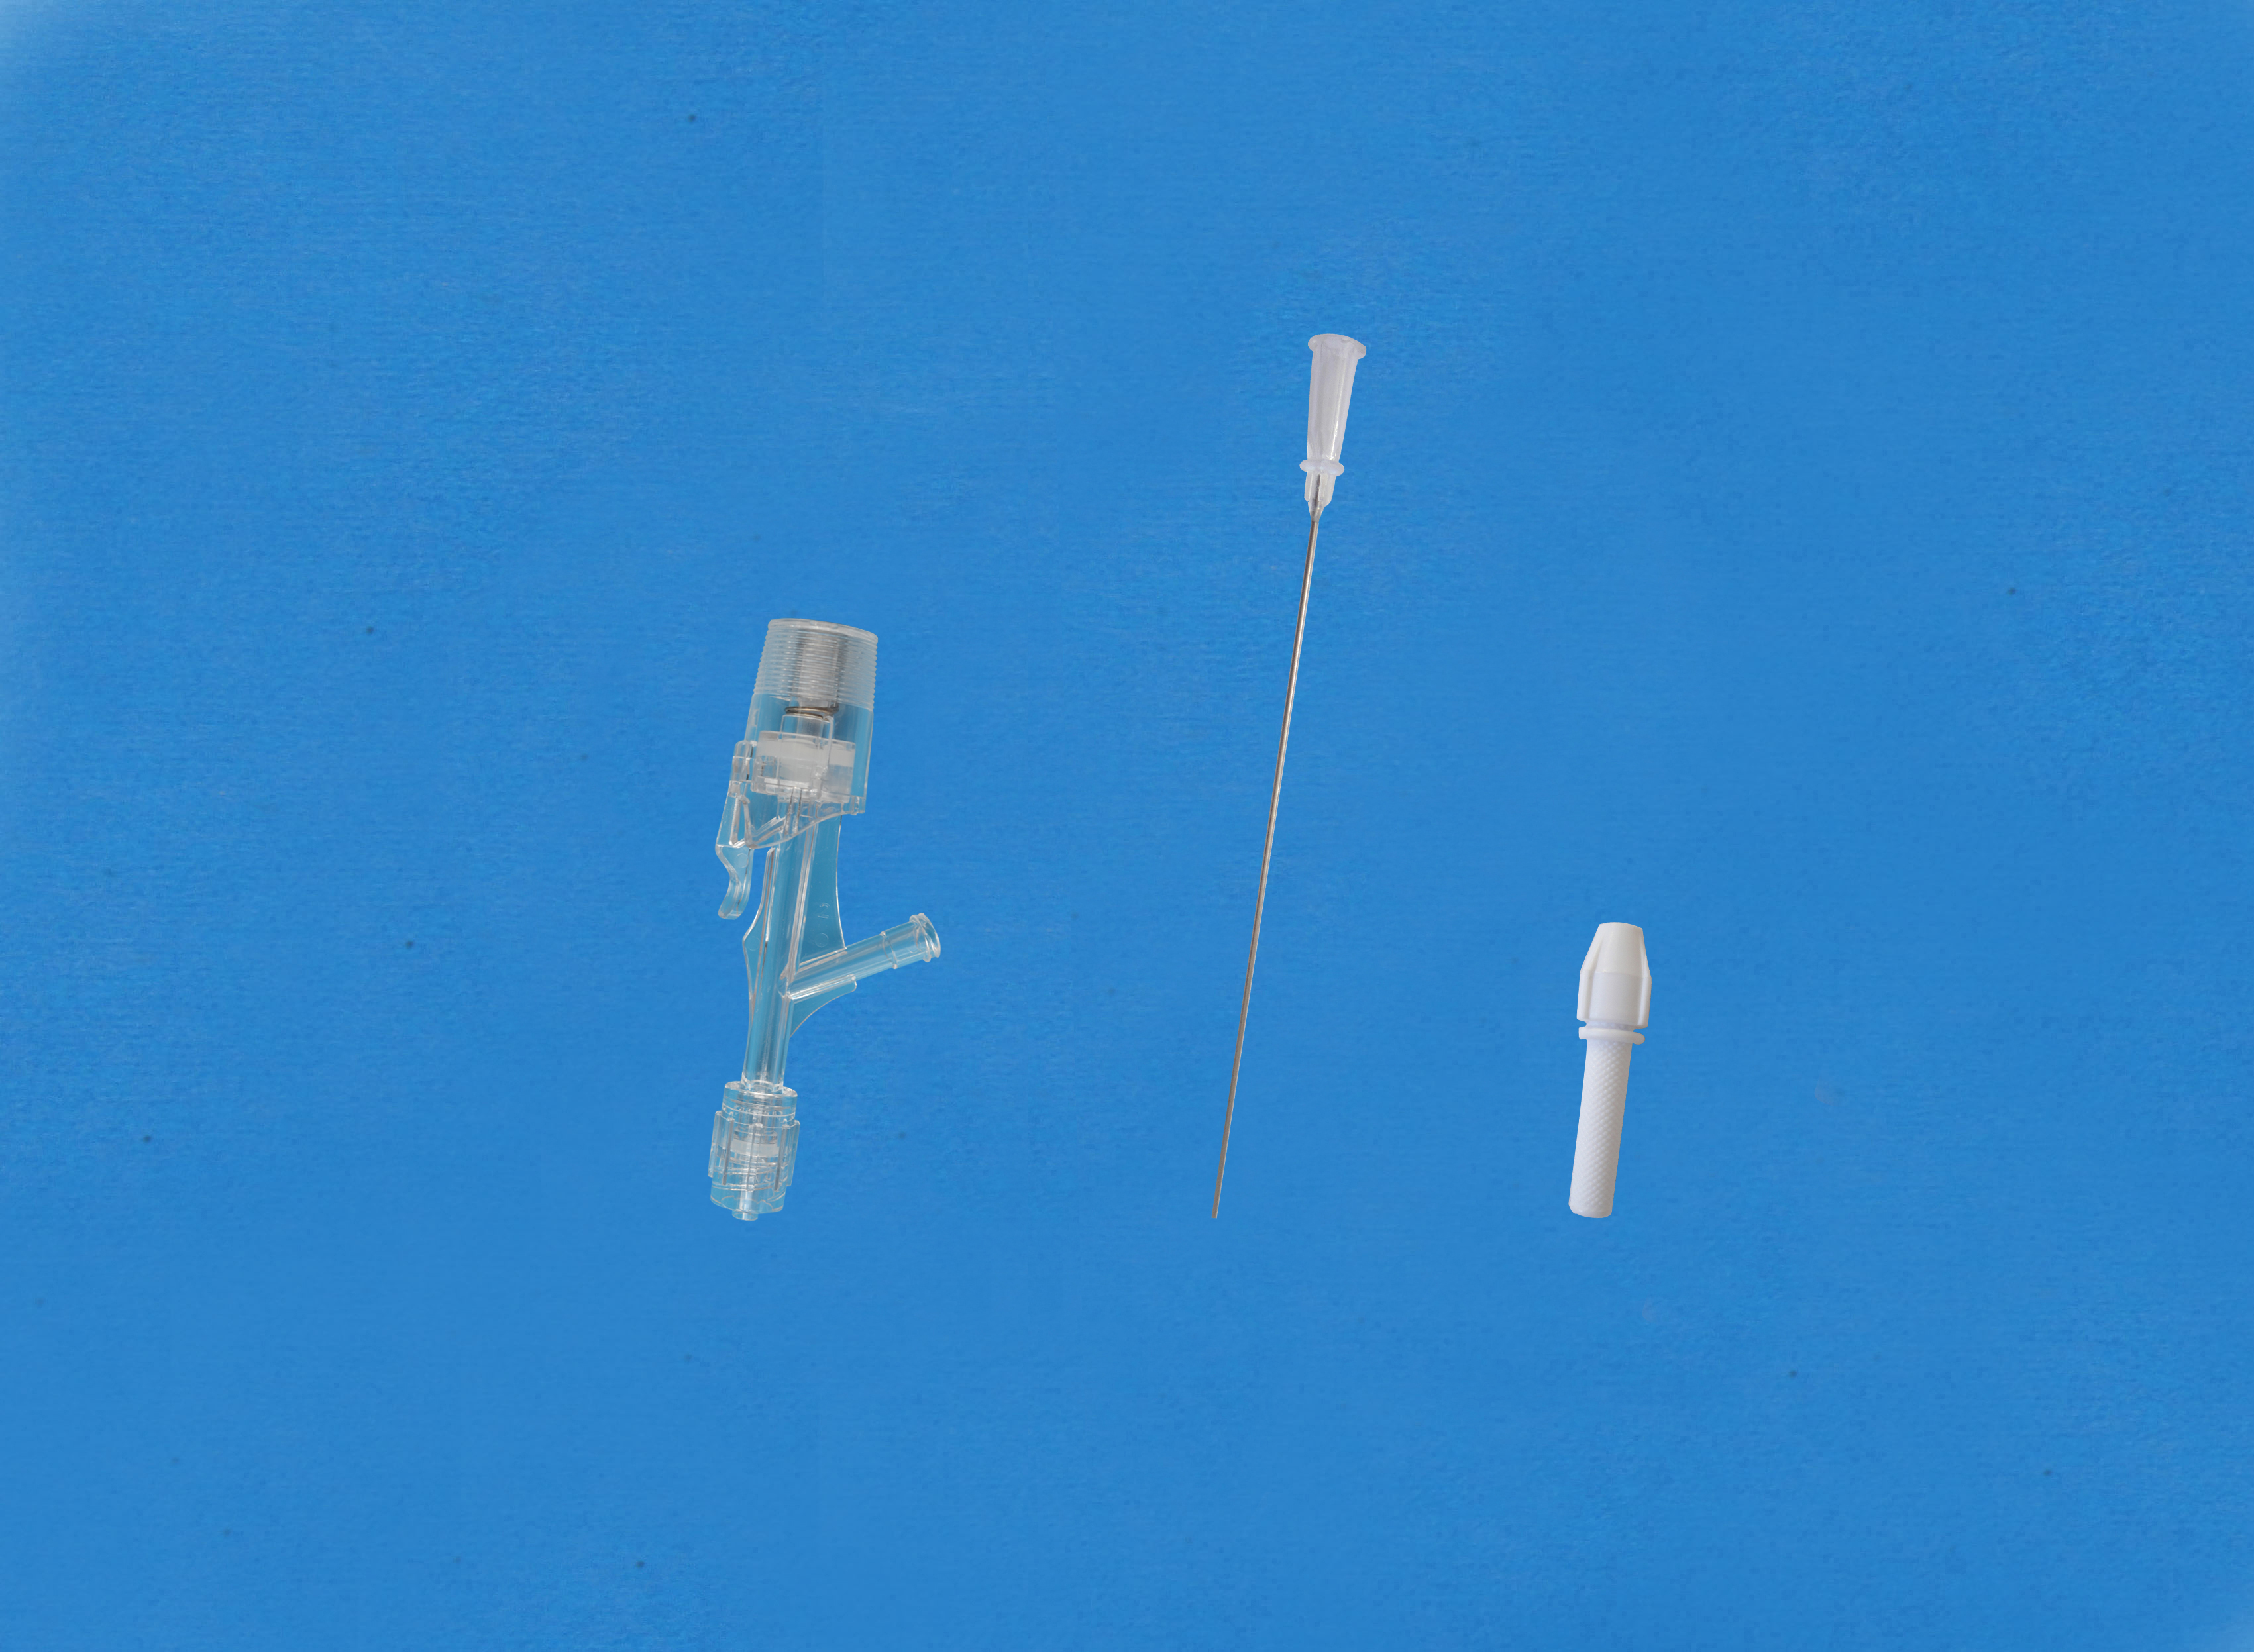 Haemostatic valves, Y click, Sideon Female Luer, Insertion Tool with Small Hub, White/Copper Torquer